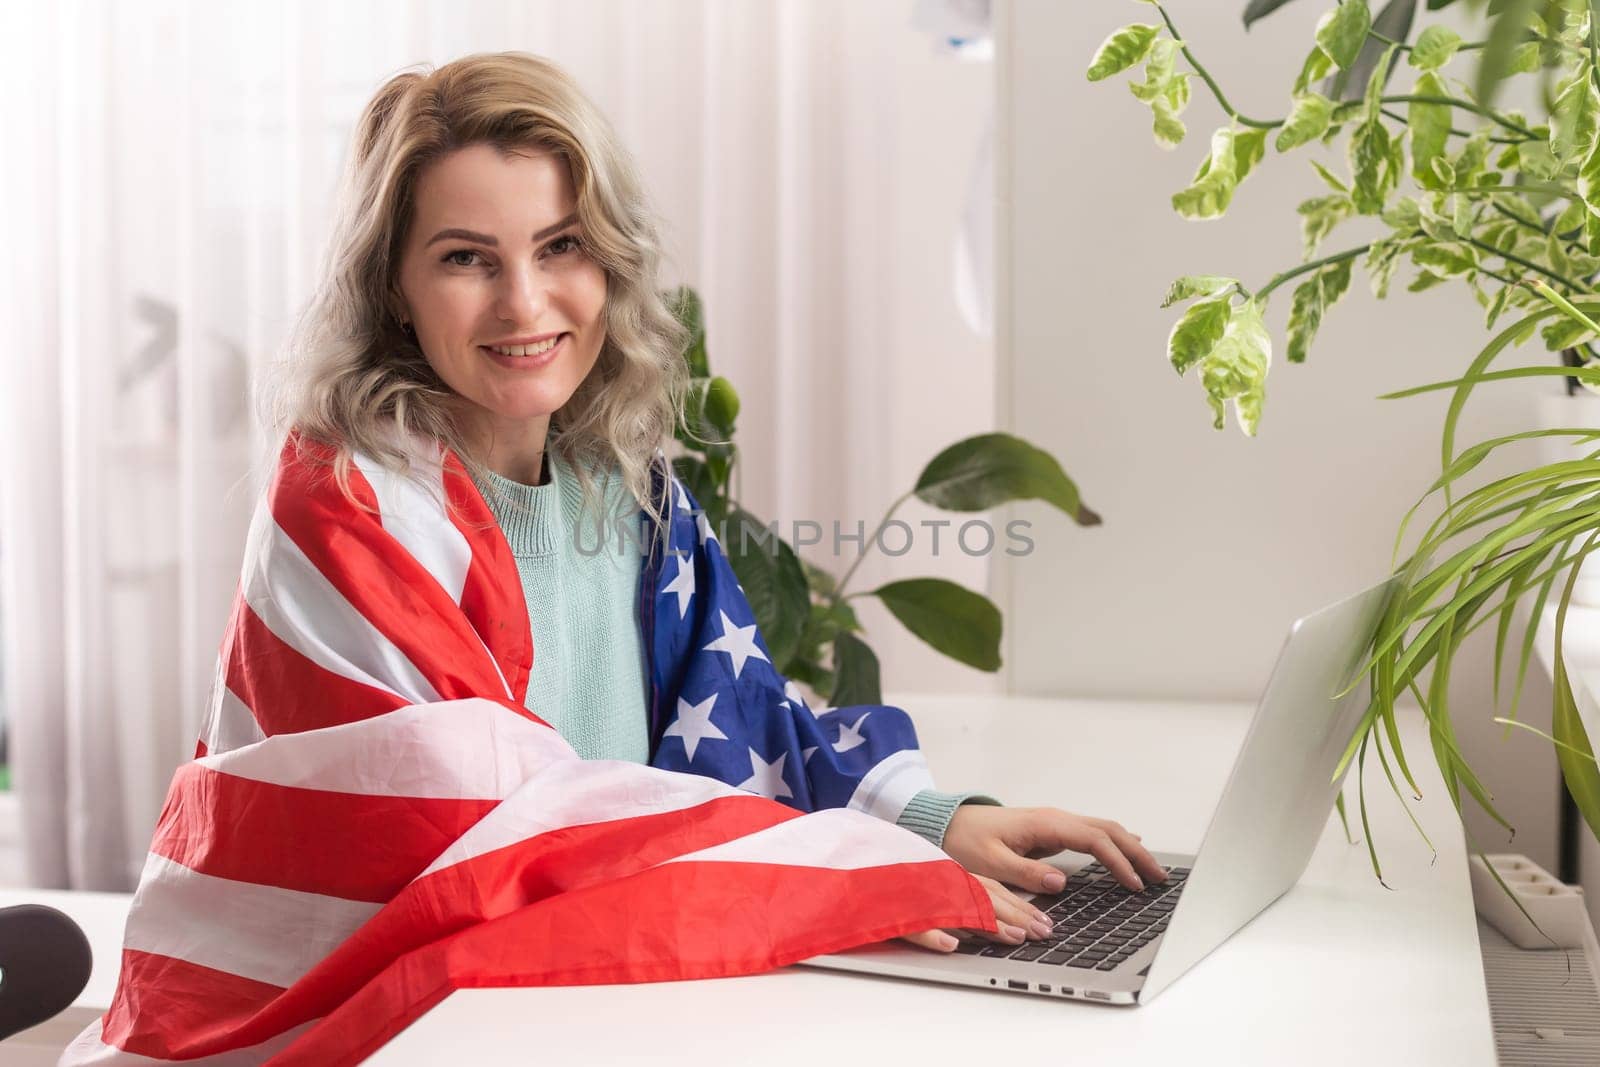 Happy woman employee sitting wrapped in USA flag, shouting for joy in office workplace, celebrating labor day or US Independence day